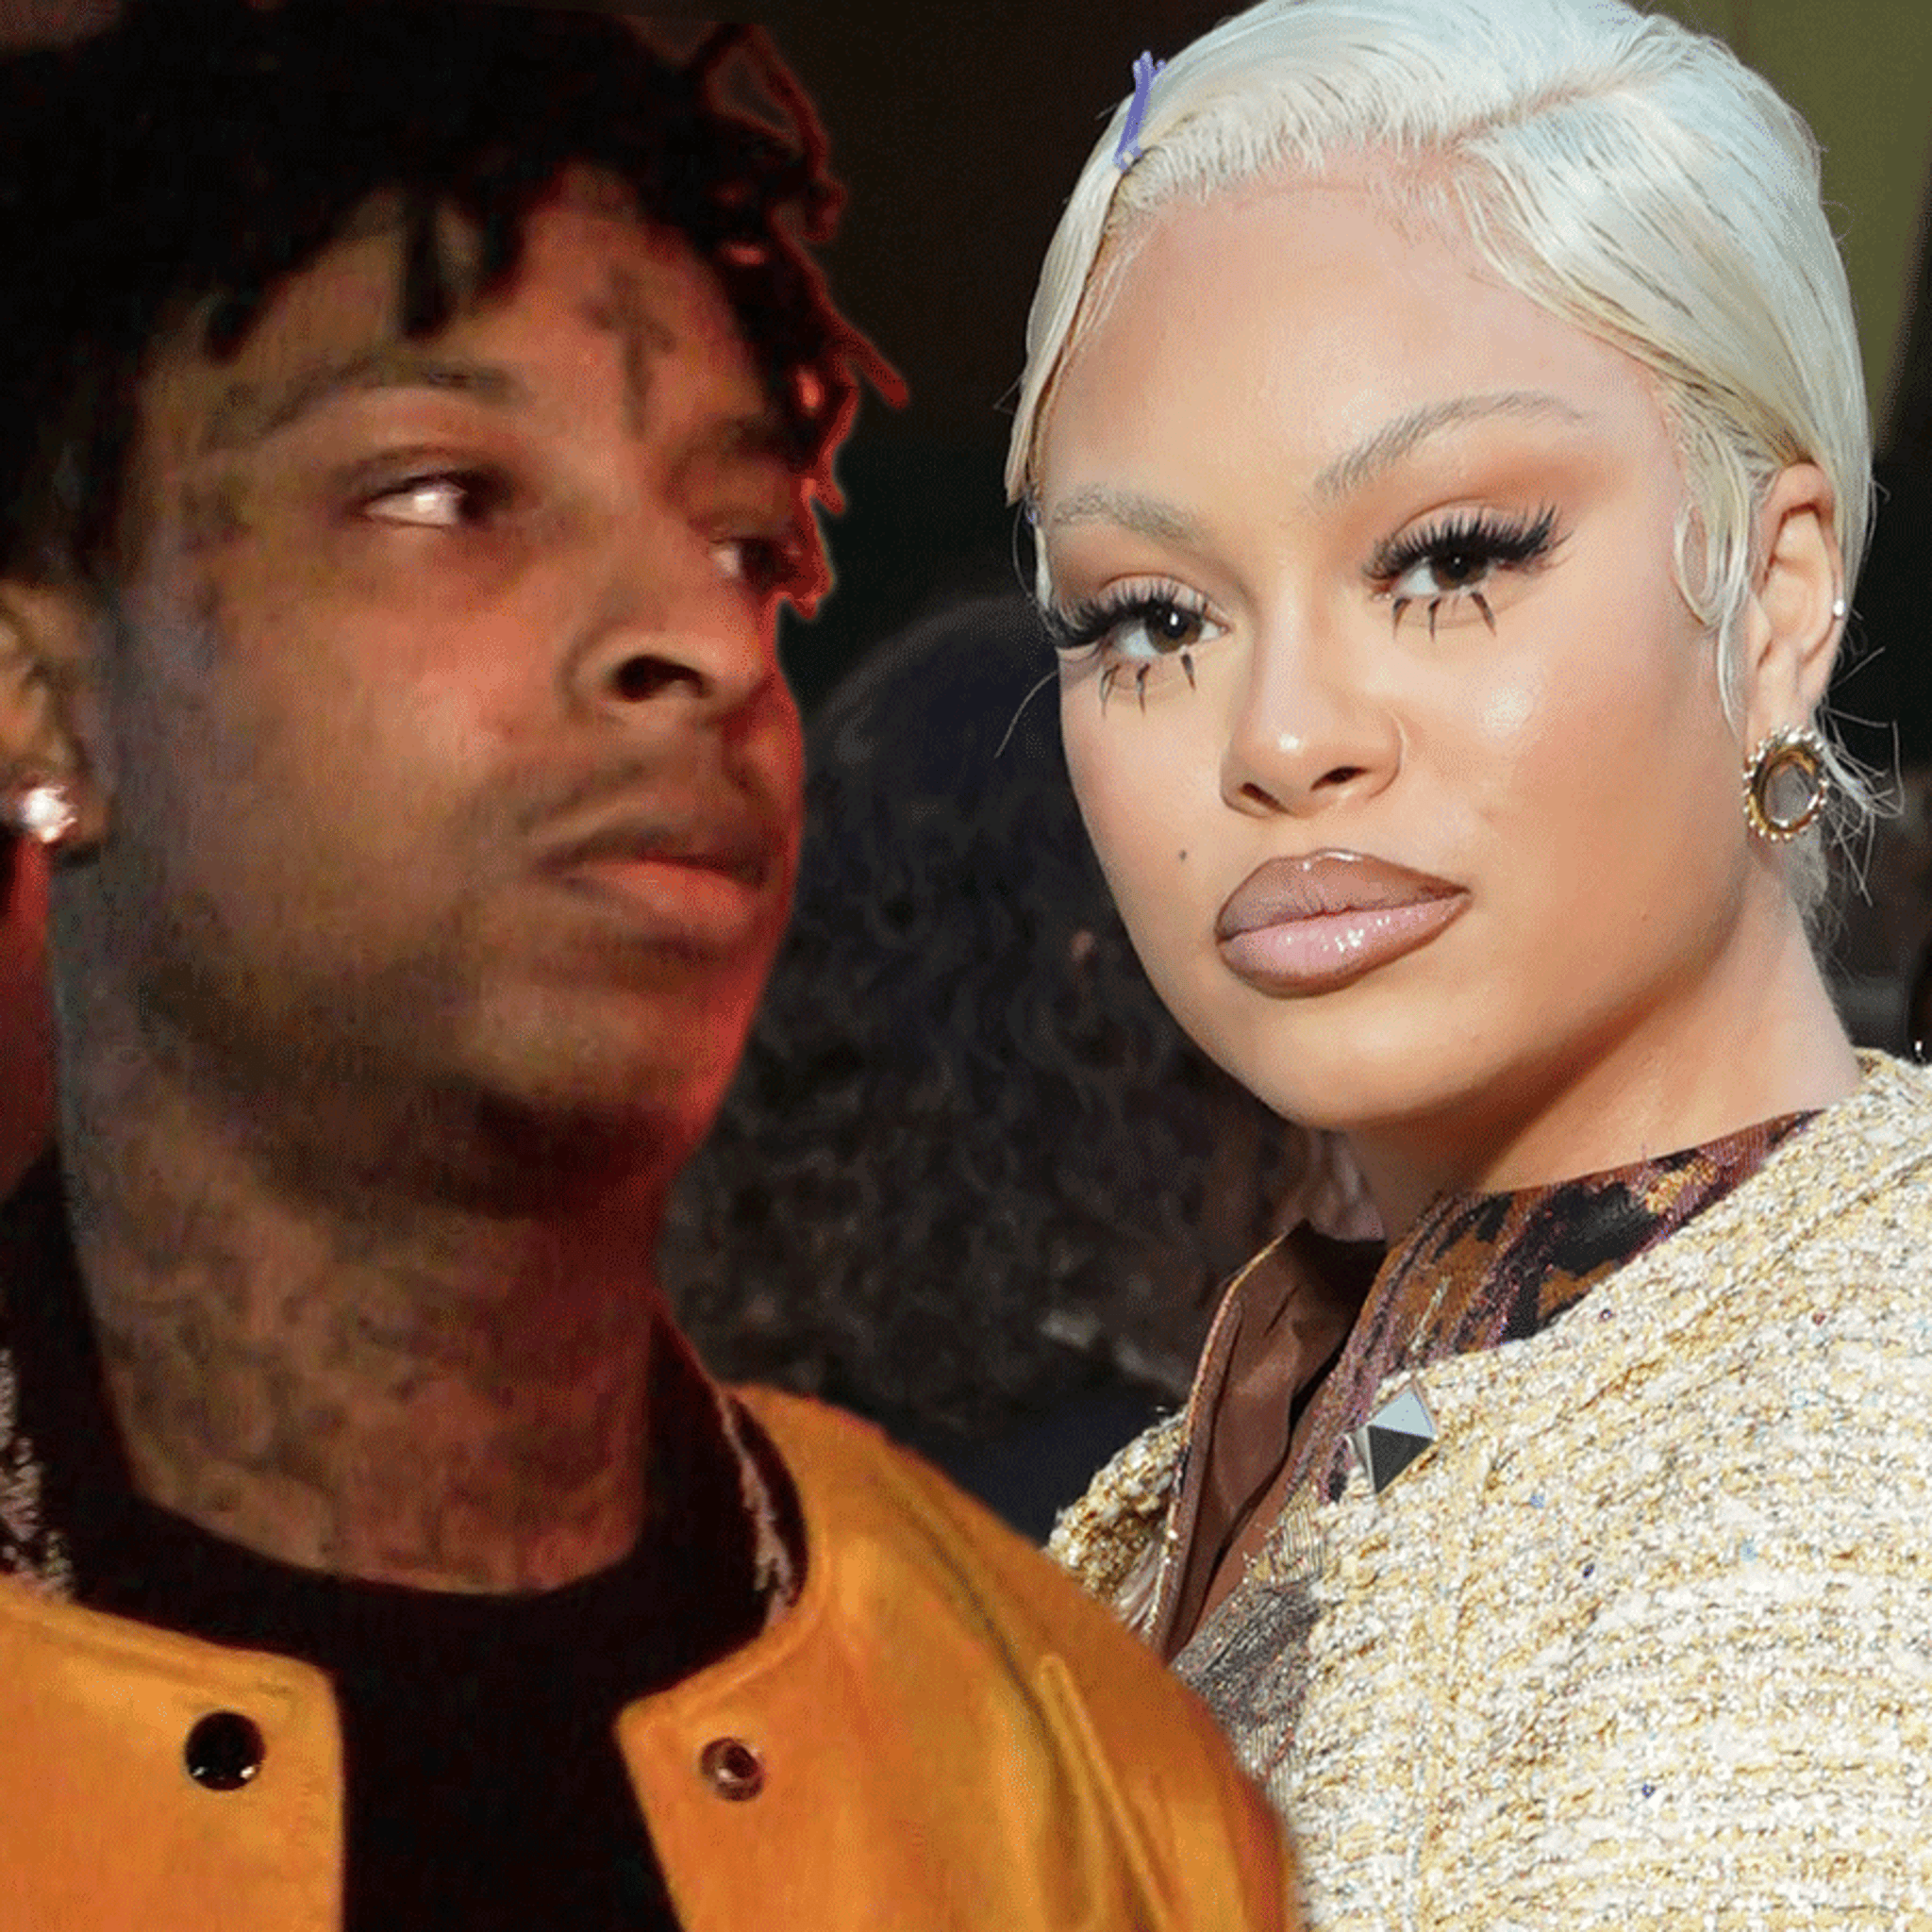 21 Savage Spotted With Alleged Wife Amid Latto Rumors